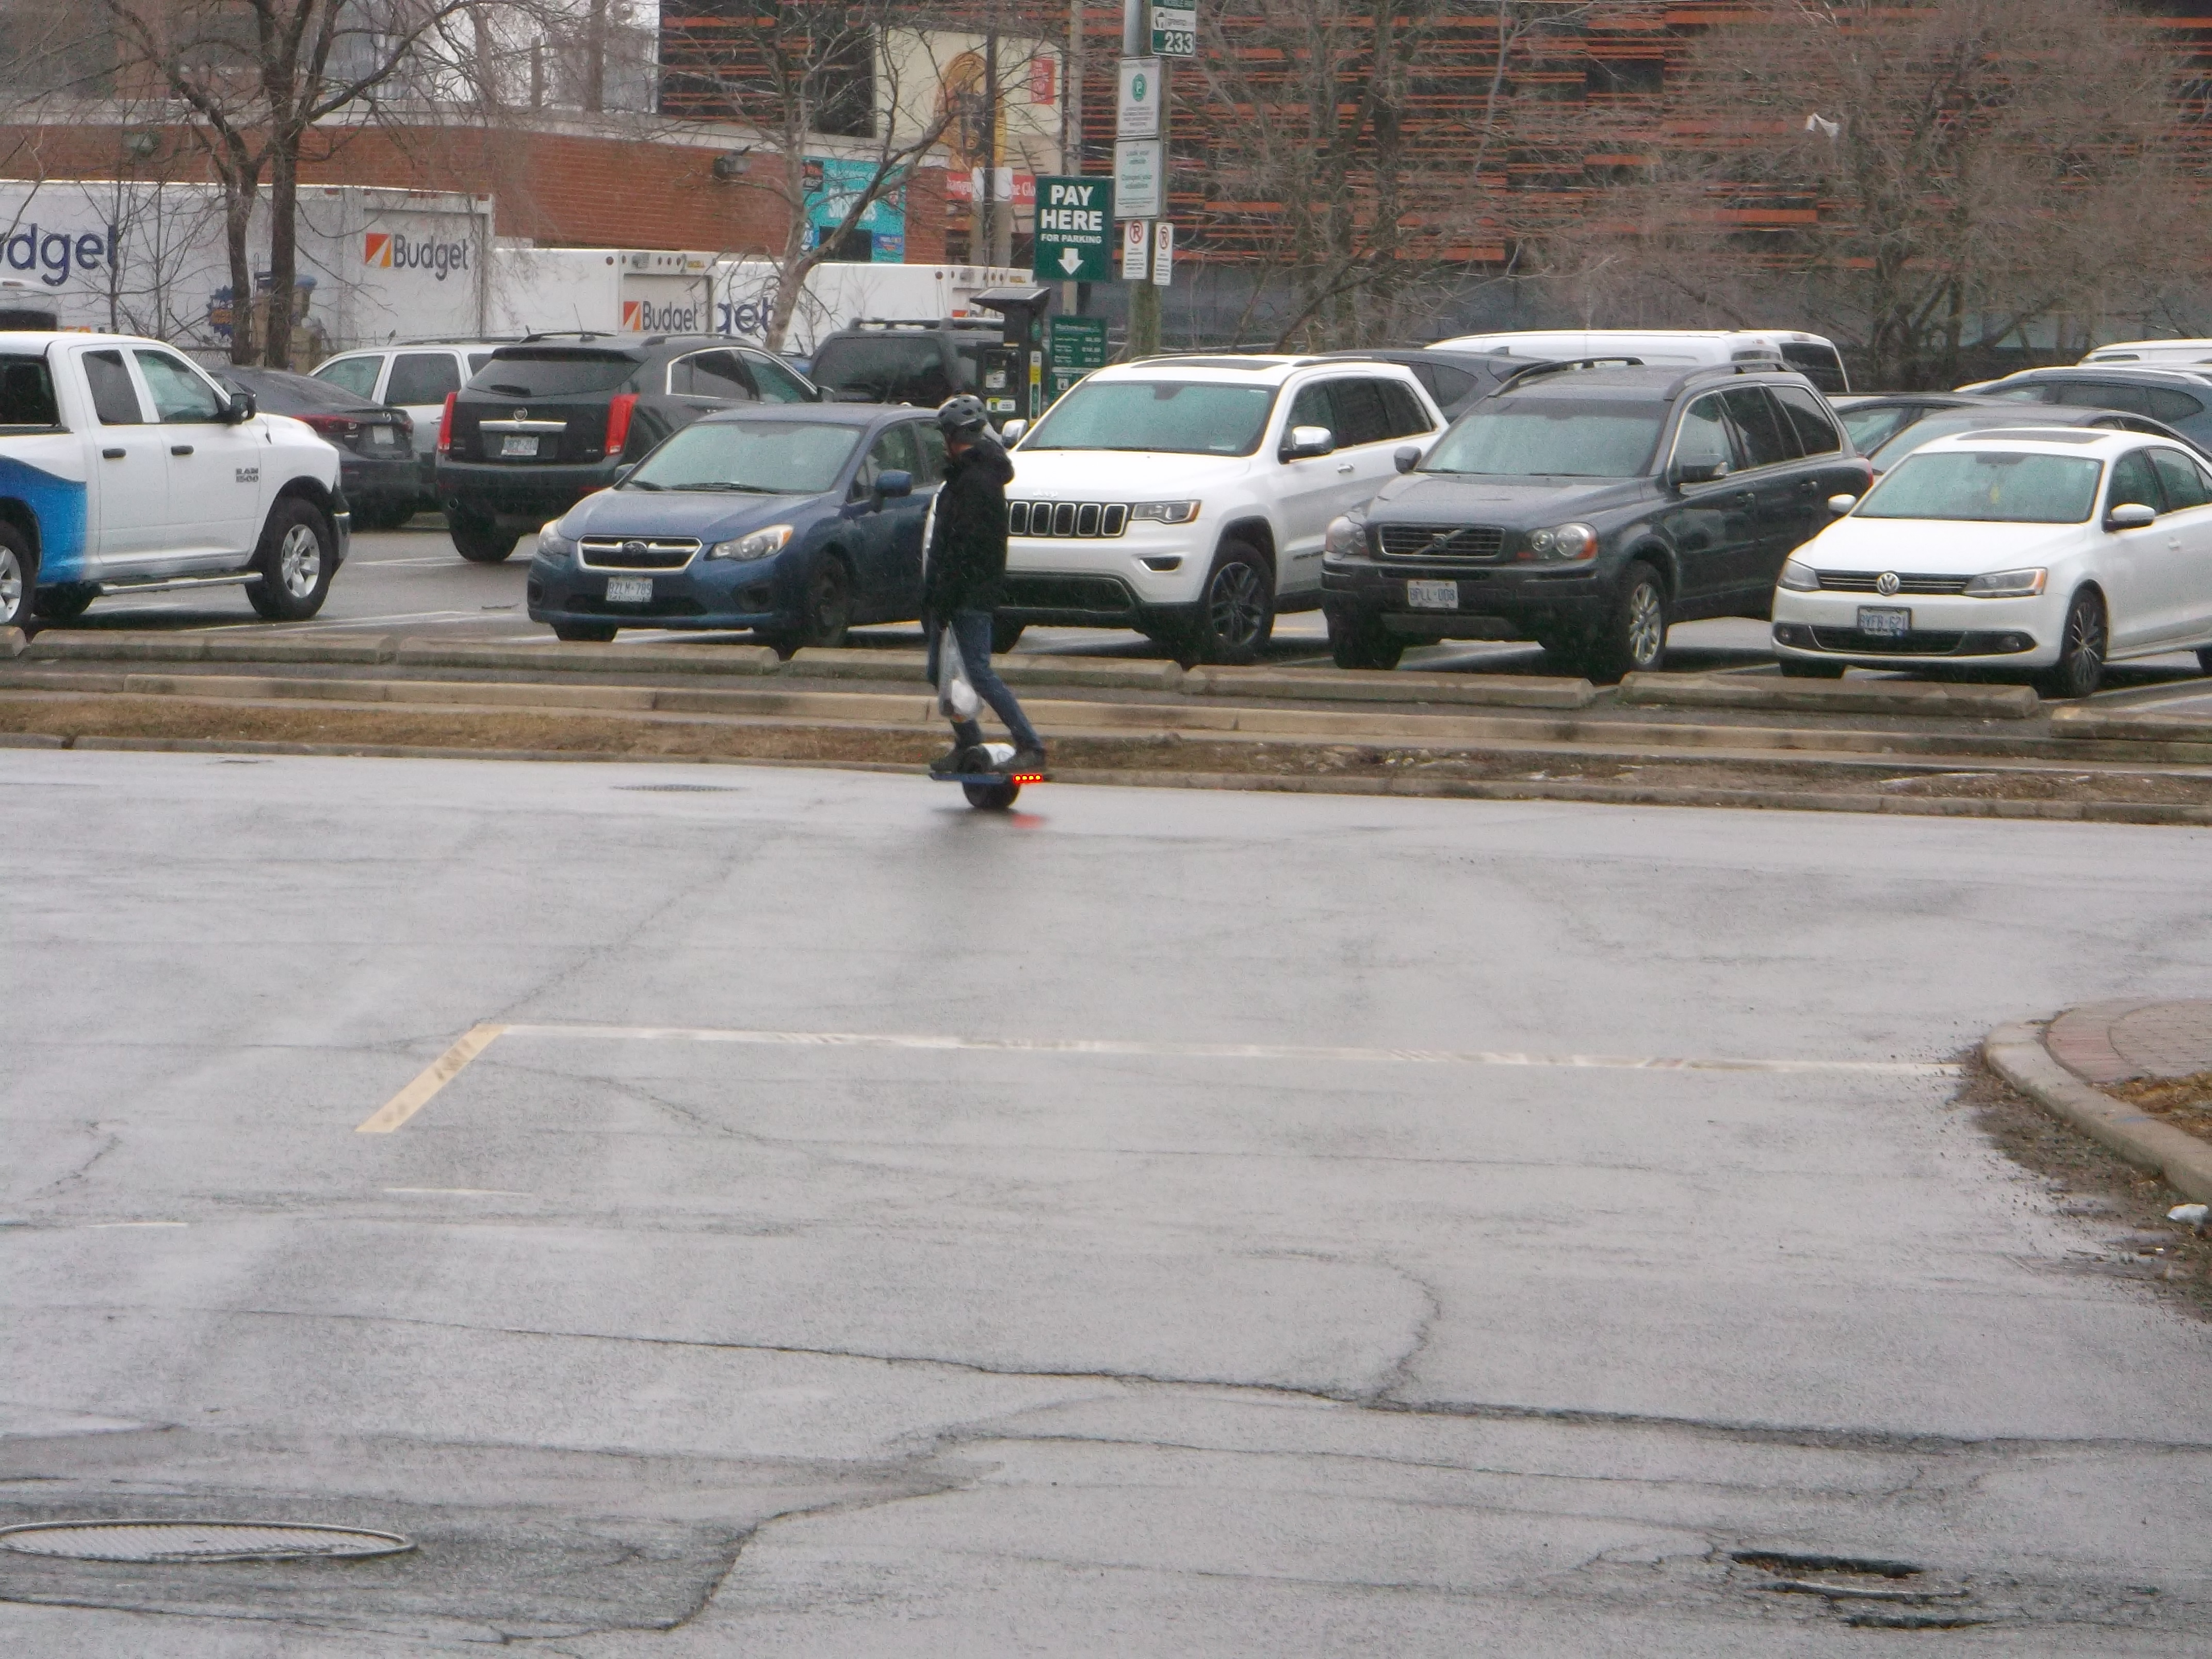 This is not a skateboard, but a scary motorize unicycle, 2018 03 06 -b photo